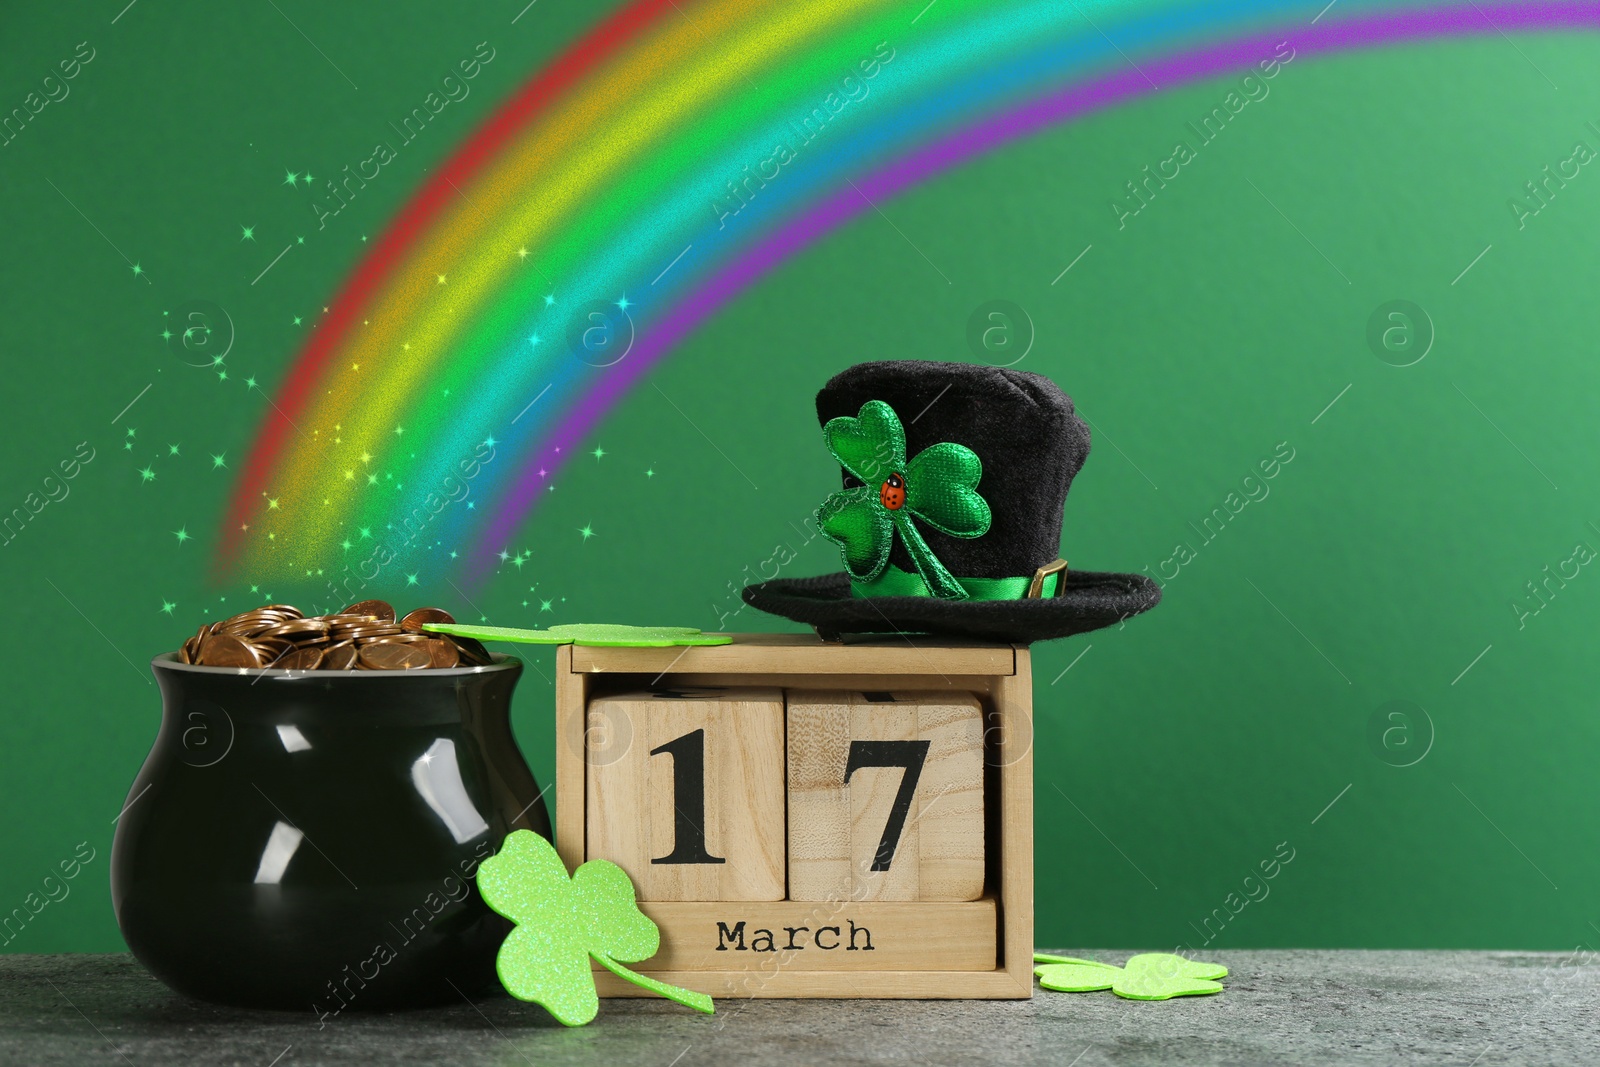 Image of Pot with gold coins, wooden block calendar, hat and cloverleaves on table against green background. St. Patrick's Day celebration